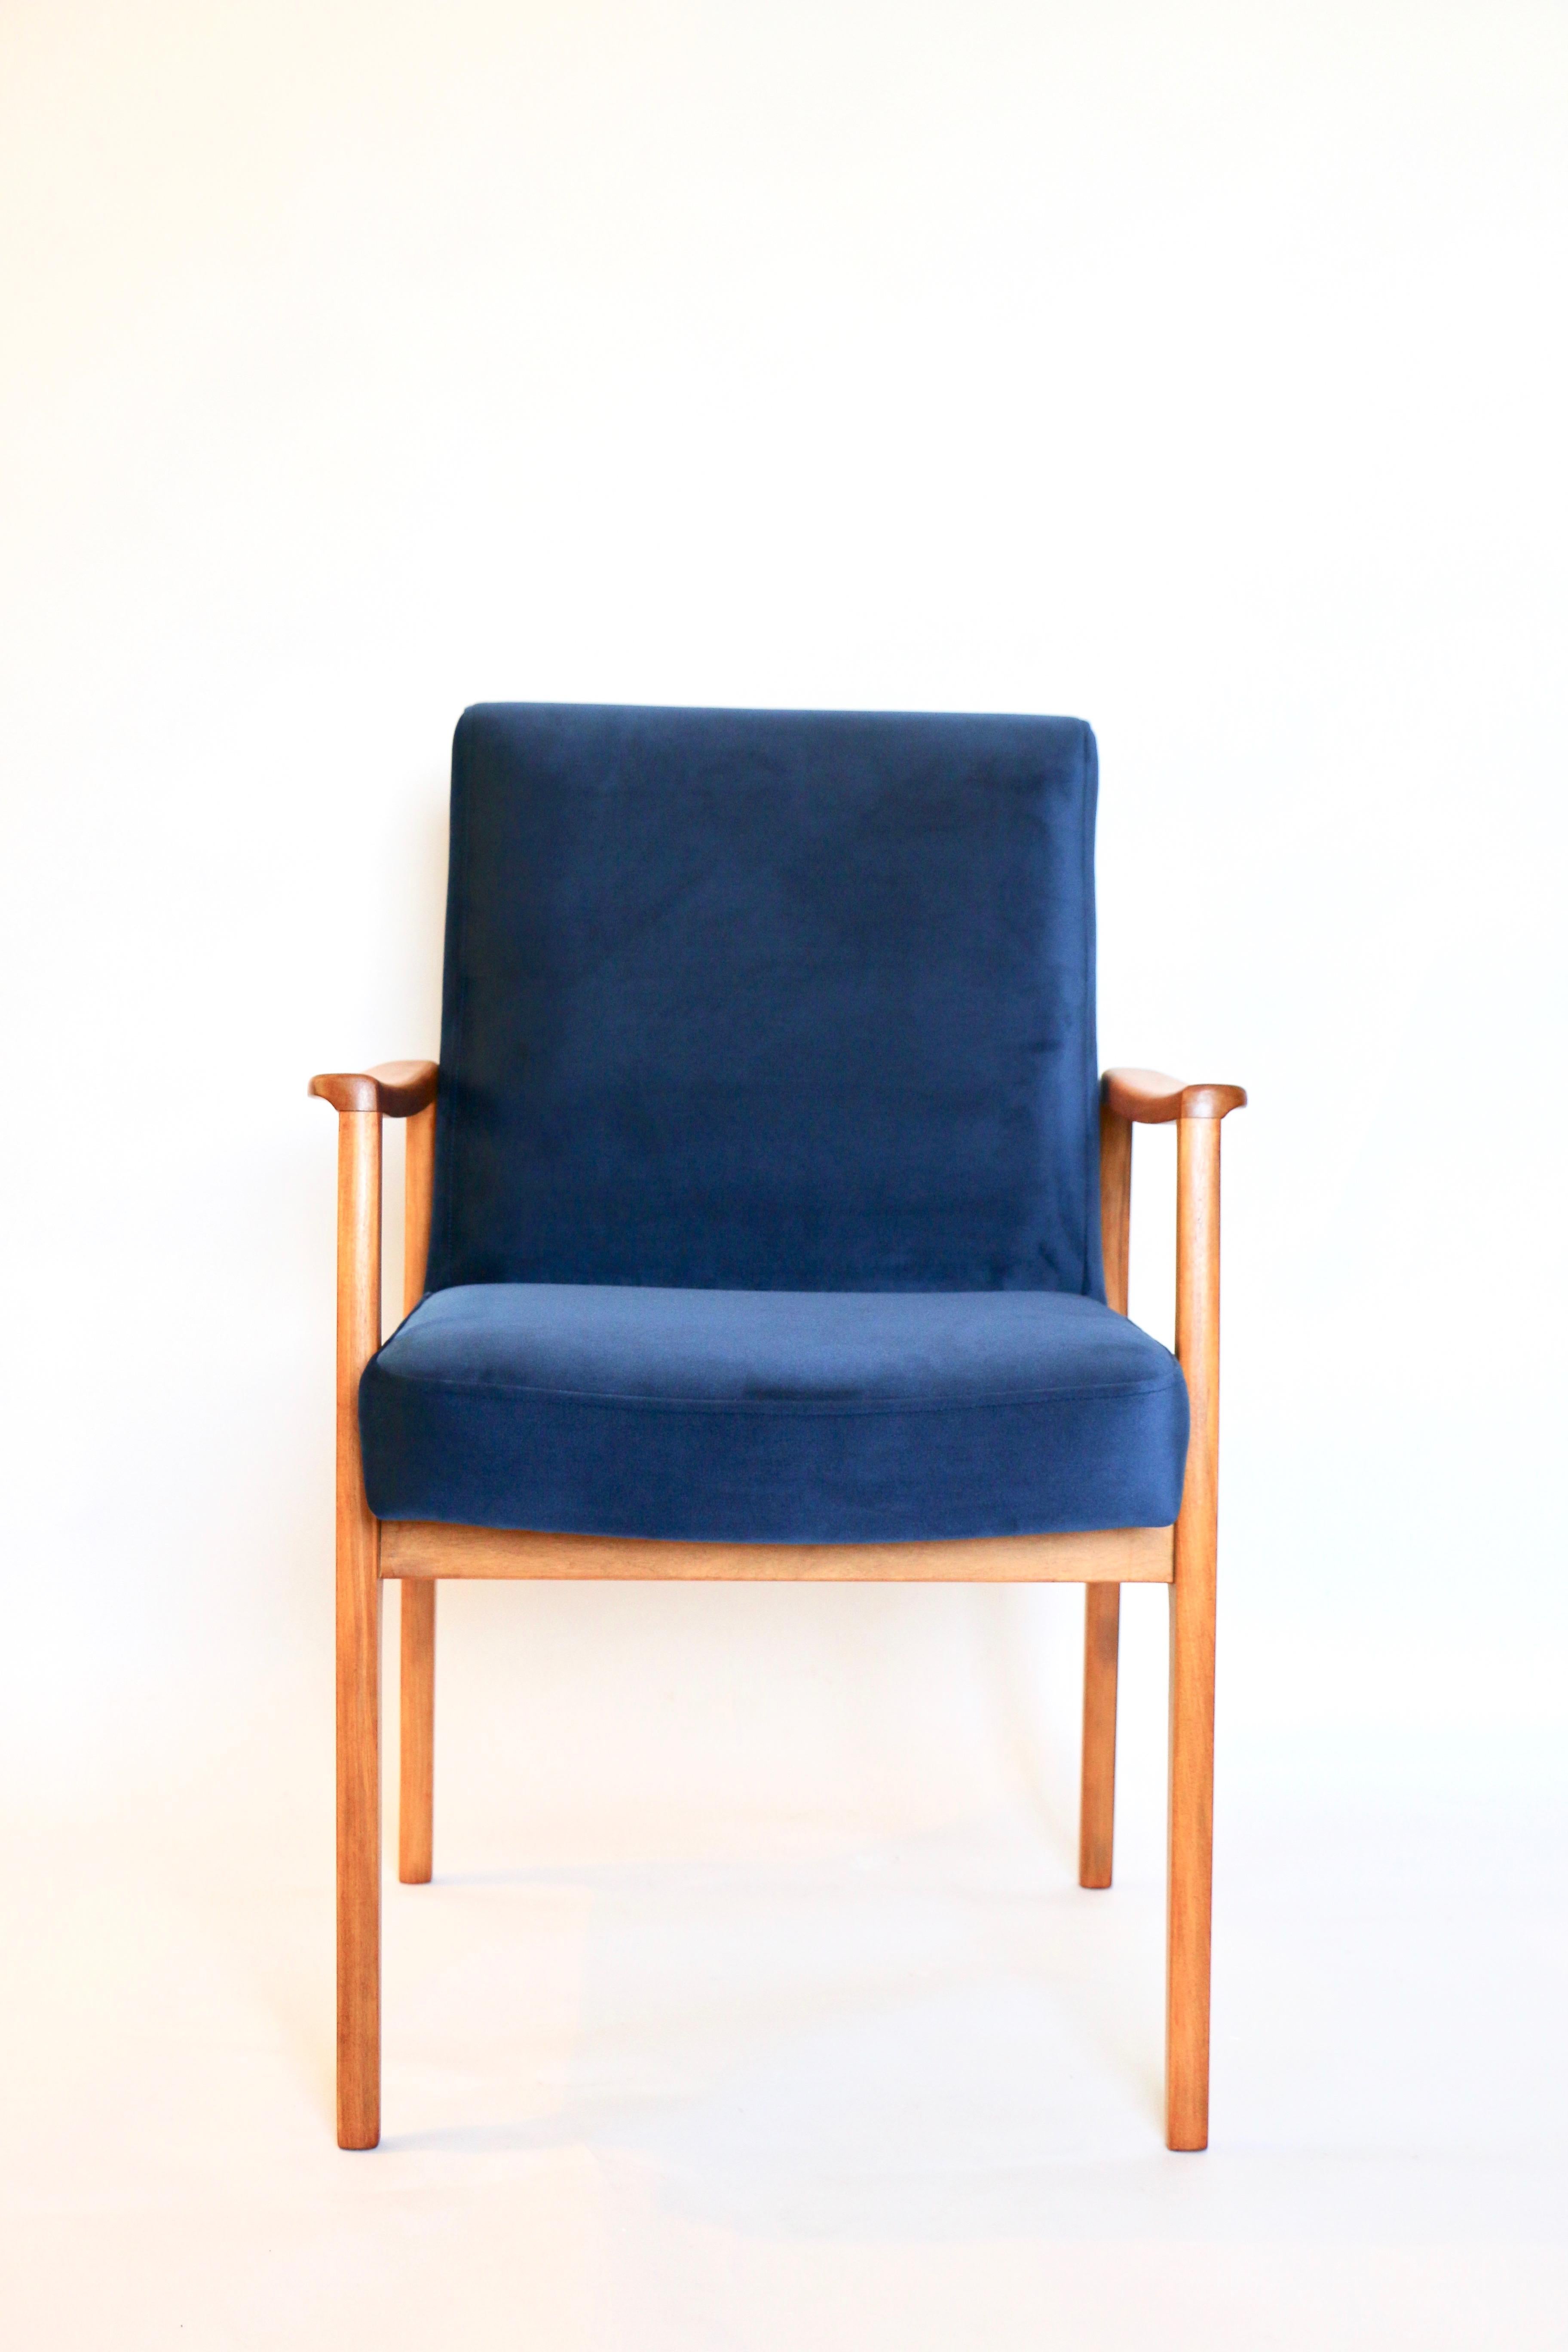 German Set of 4 Chairs in Blue Velvet from 20th Century